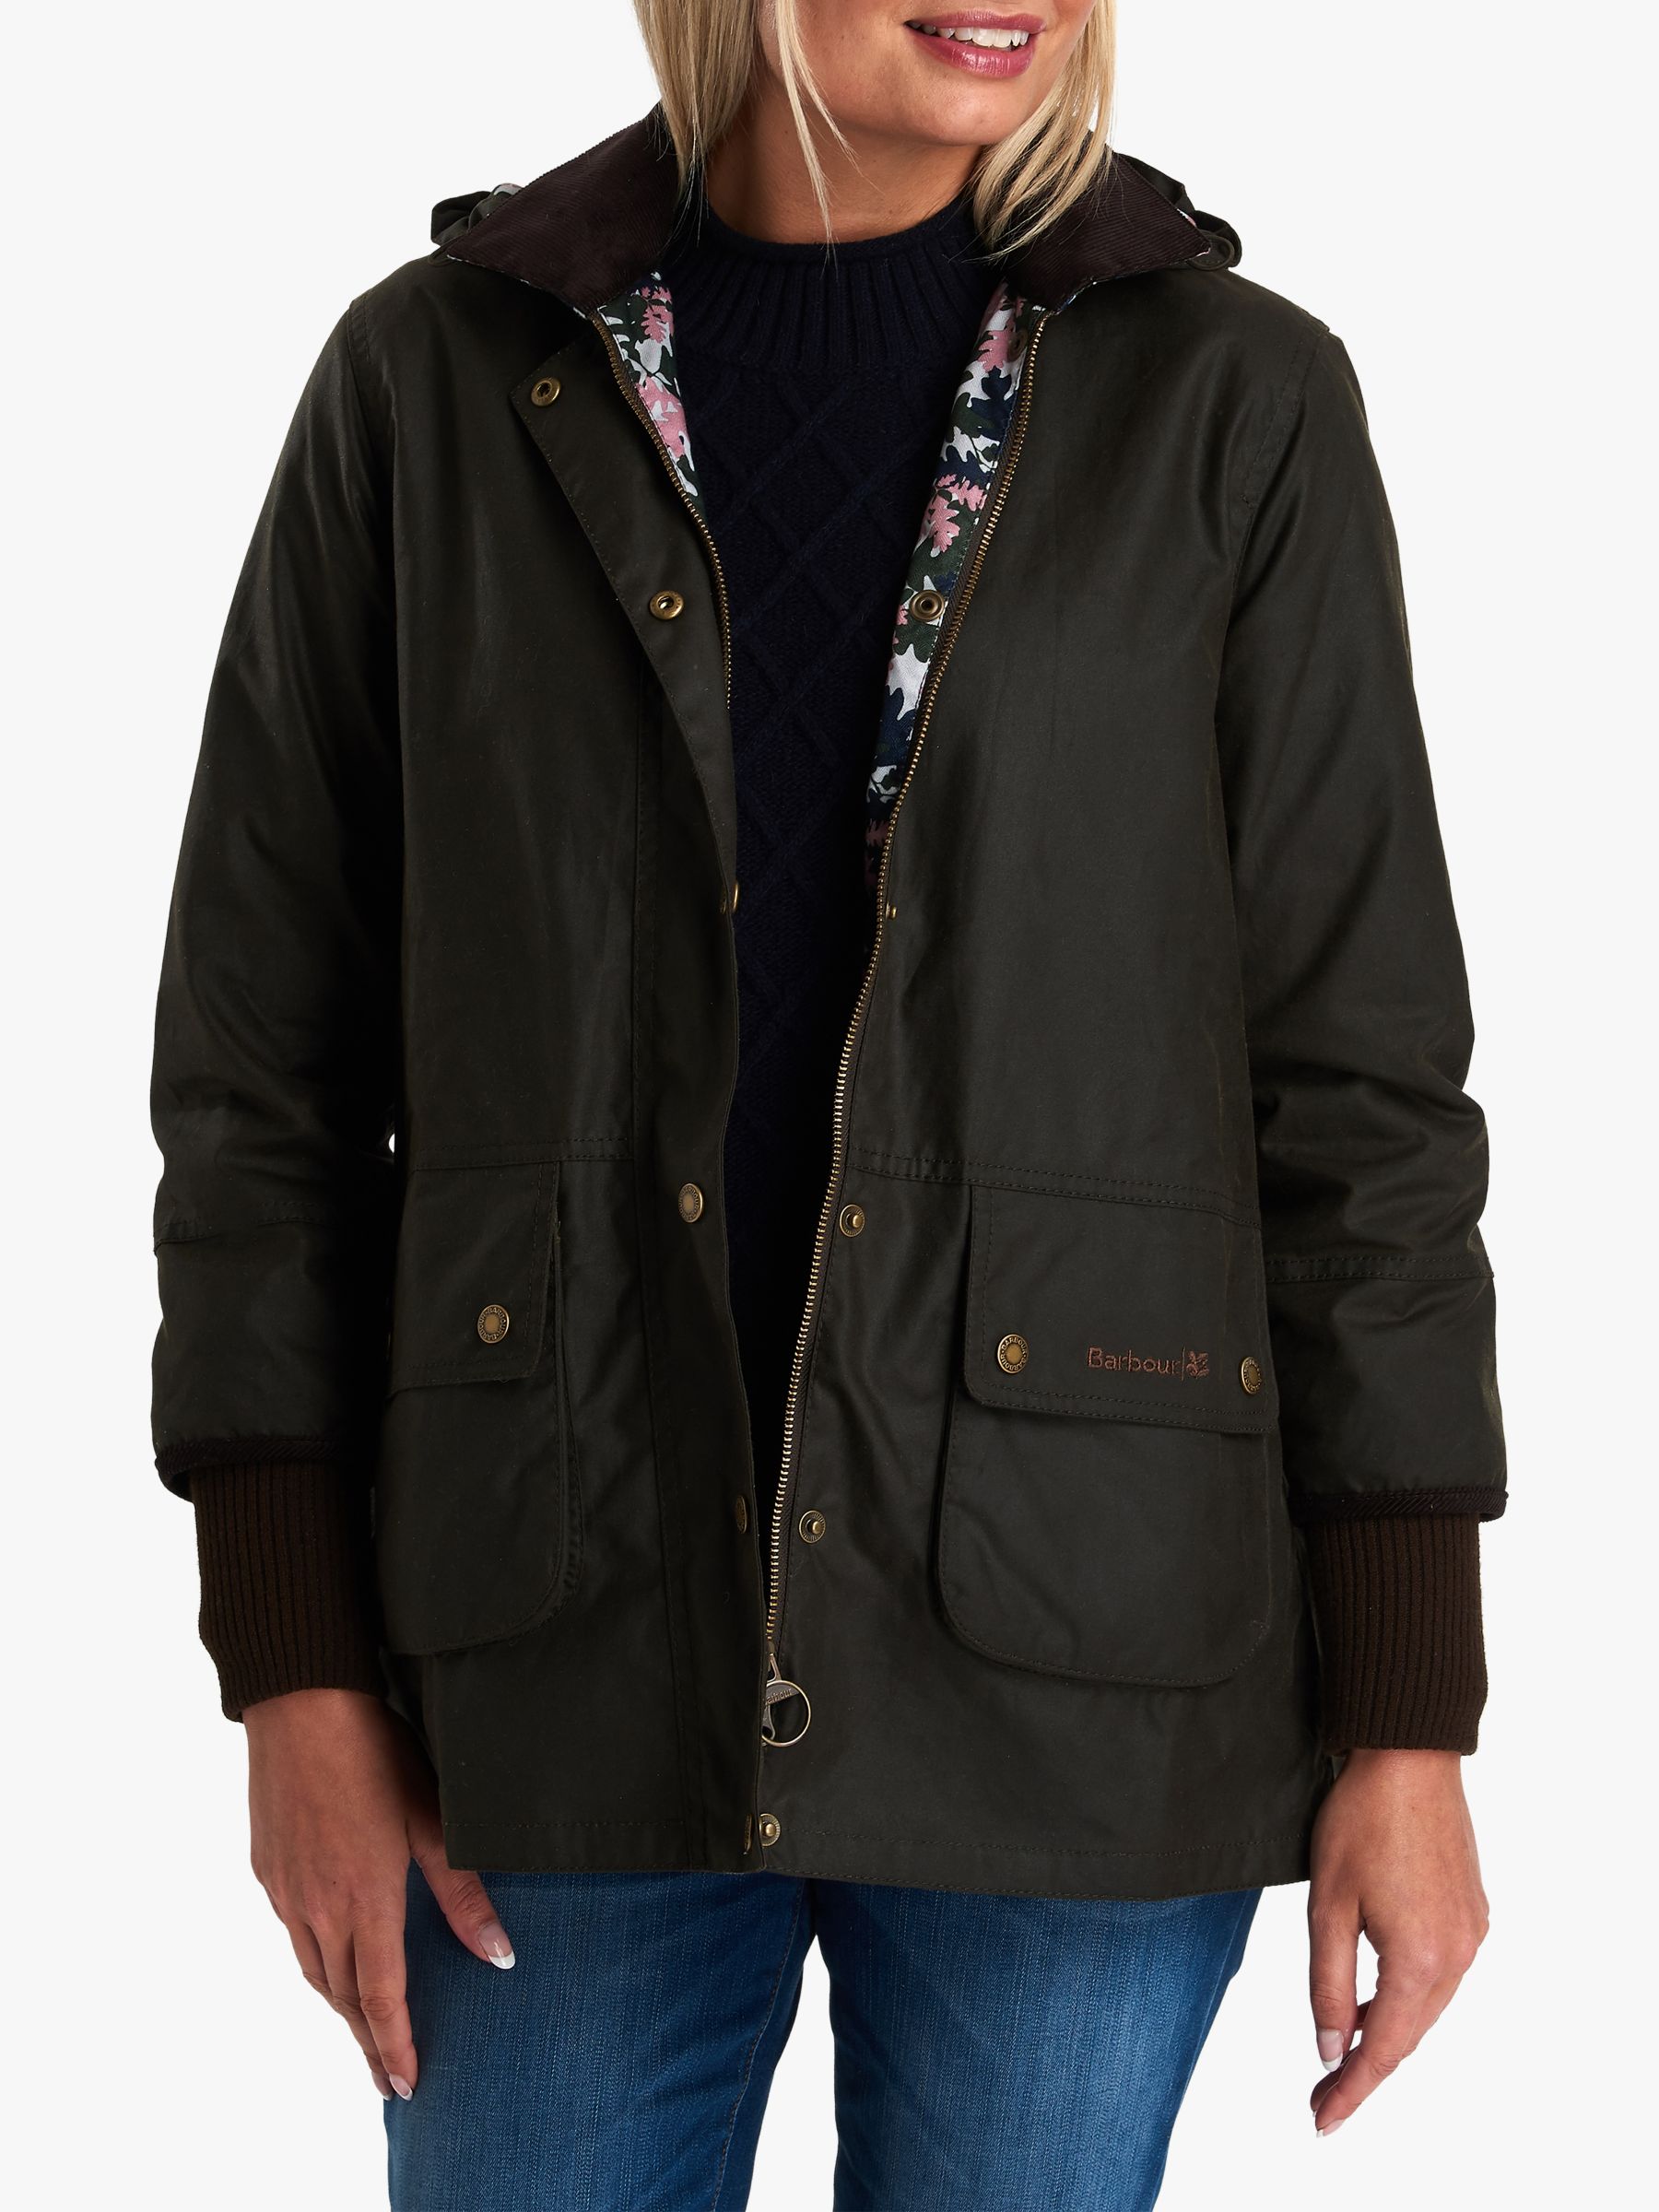 barbour national trust jacket womens 